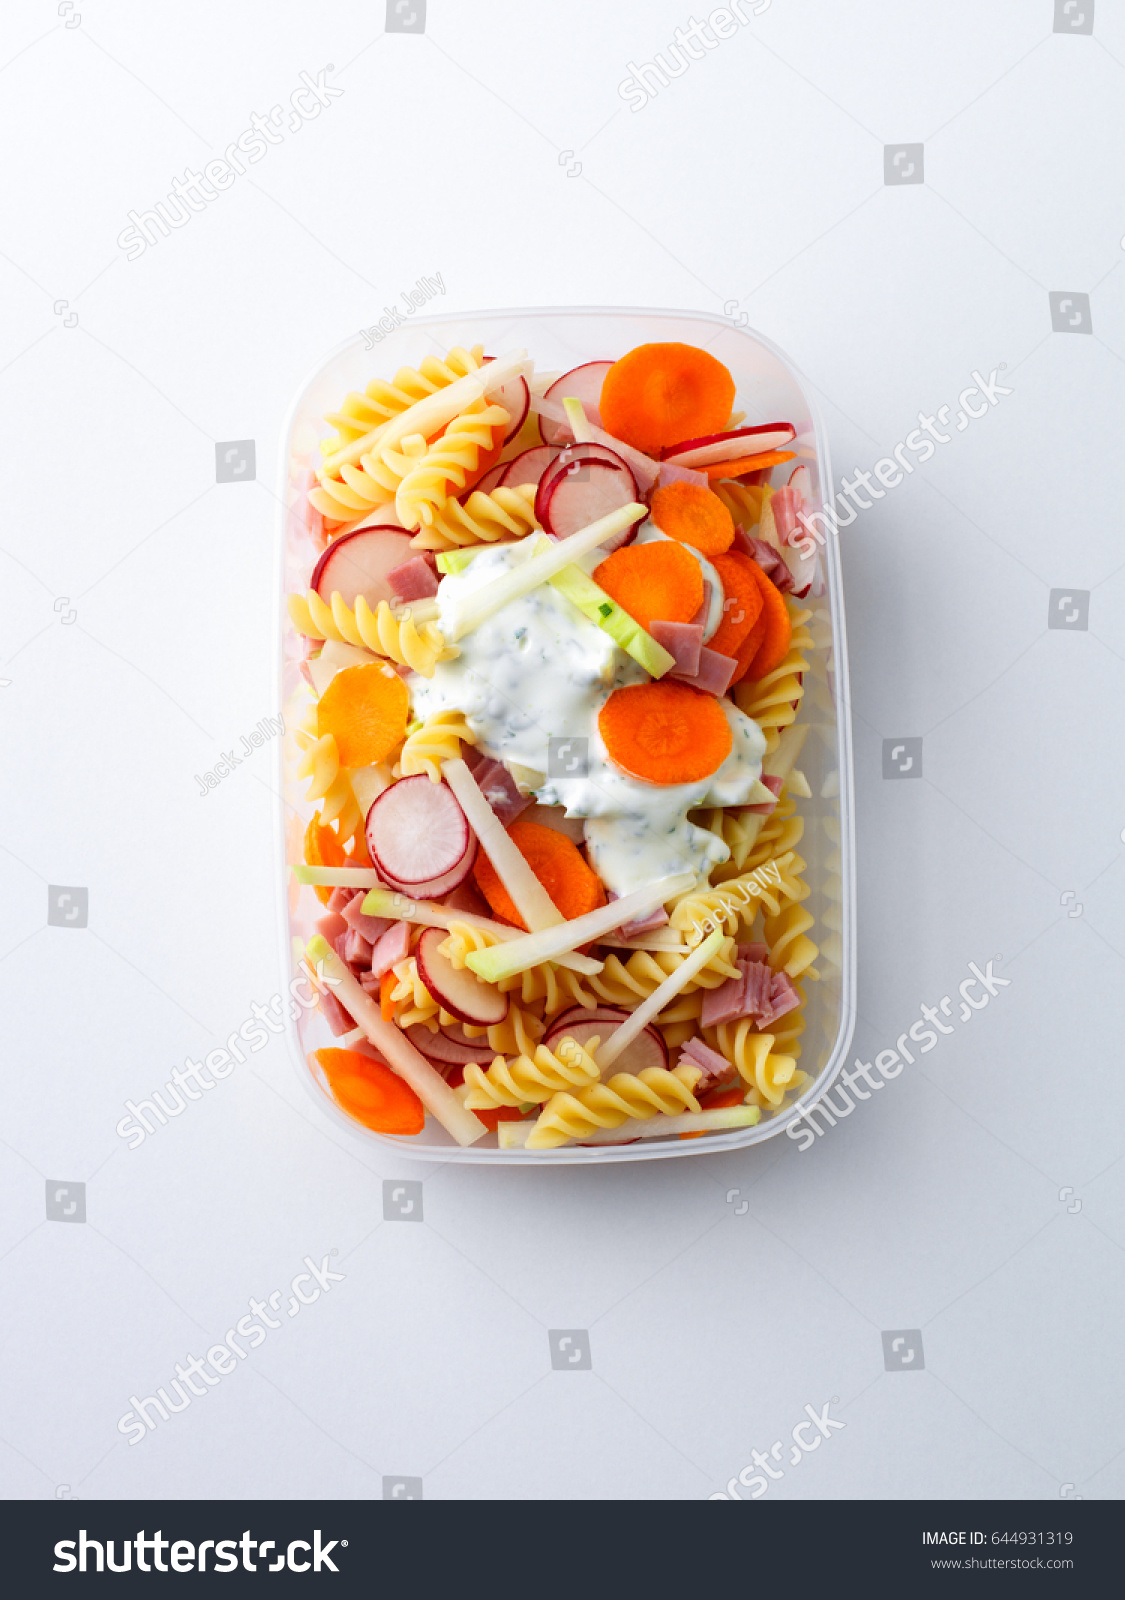 Noodle salad in lunch box #644931319